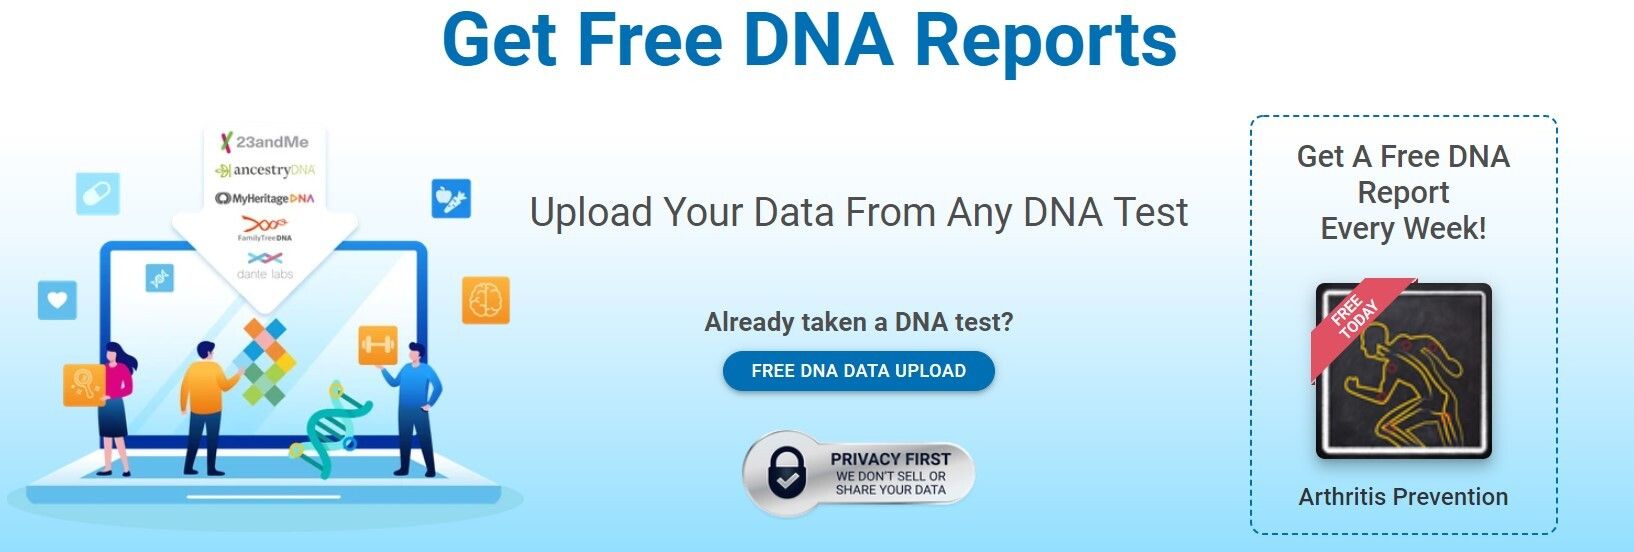 free dna test report